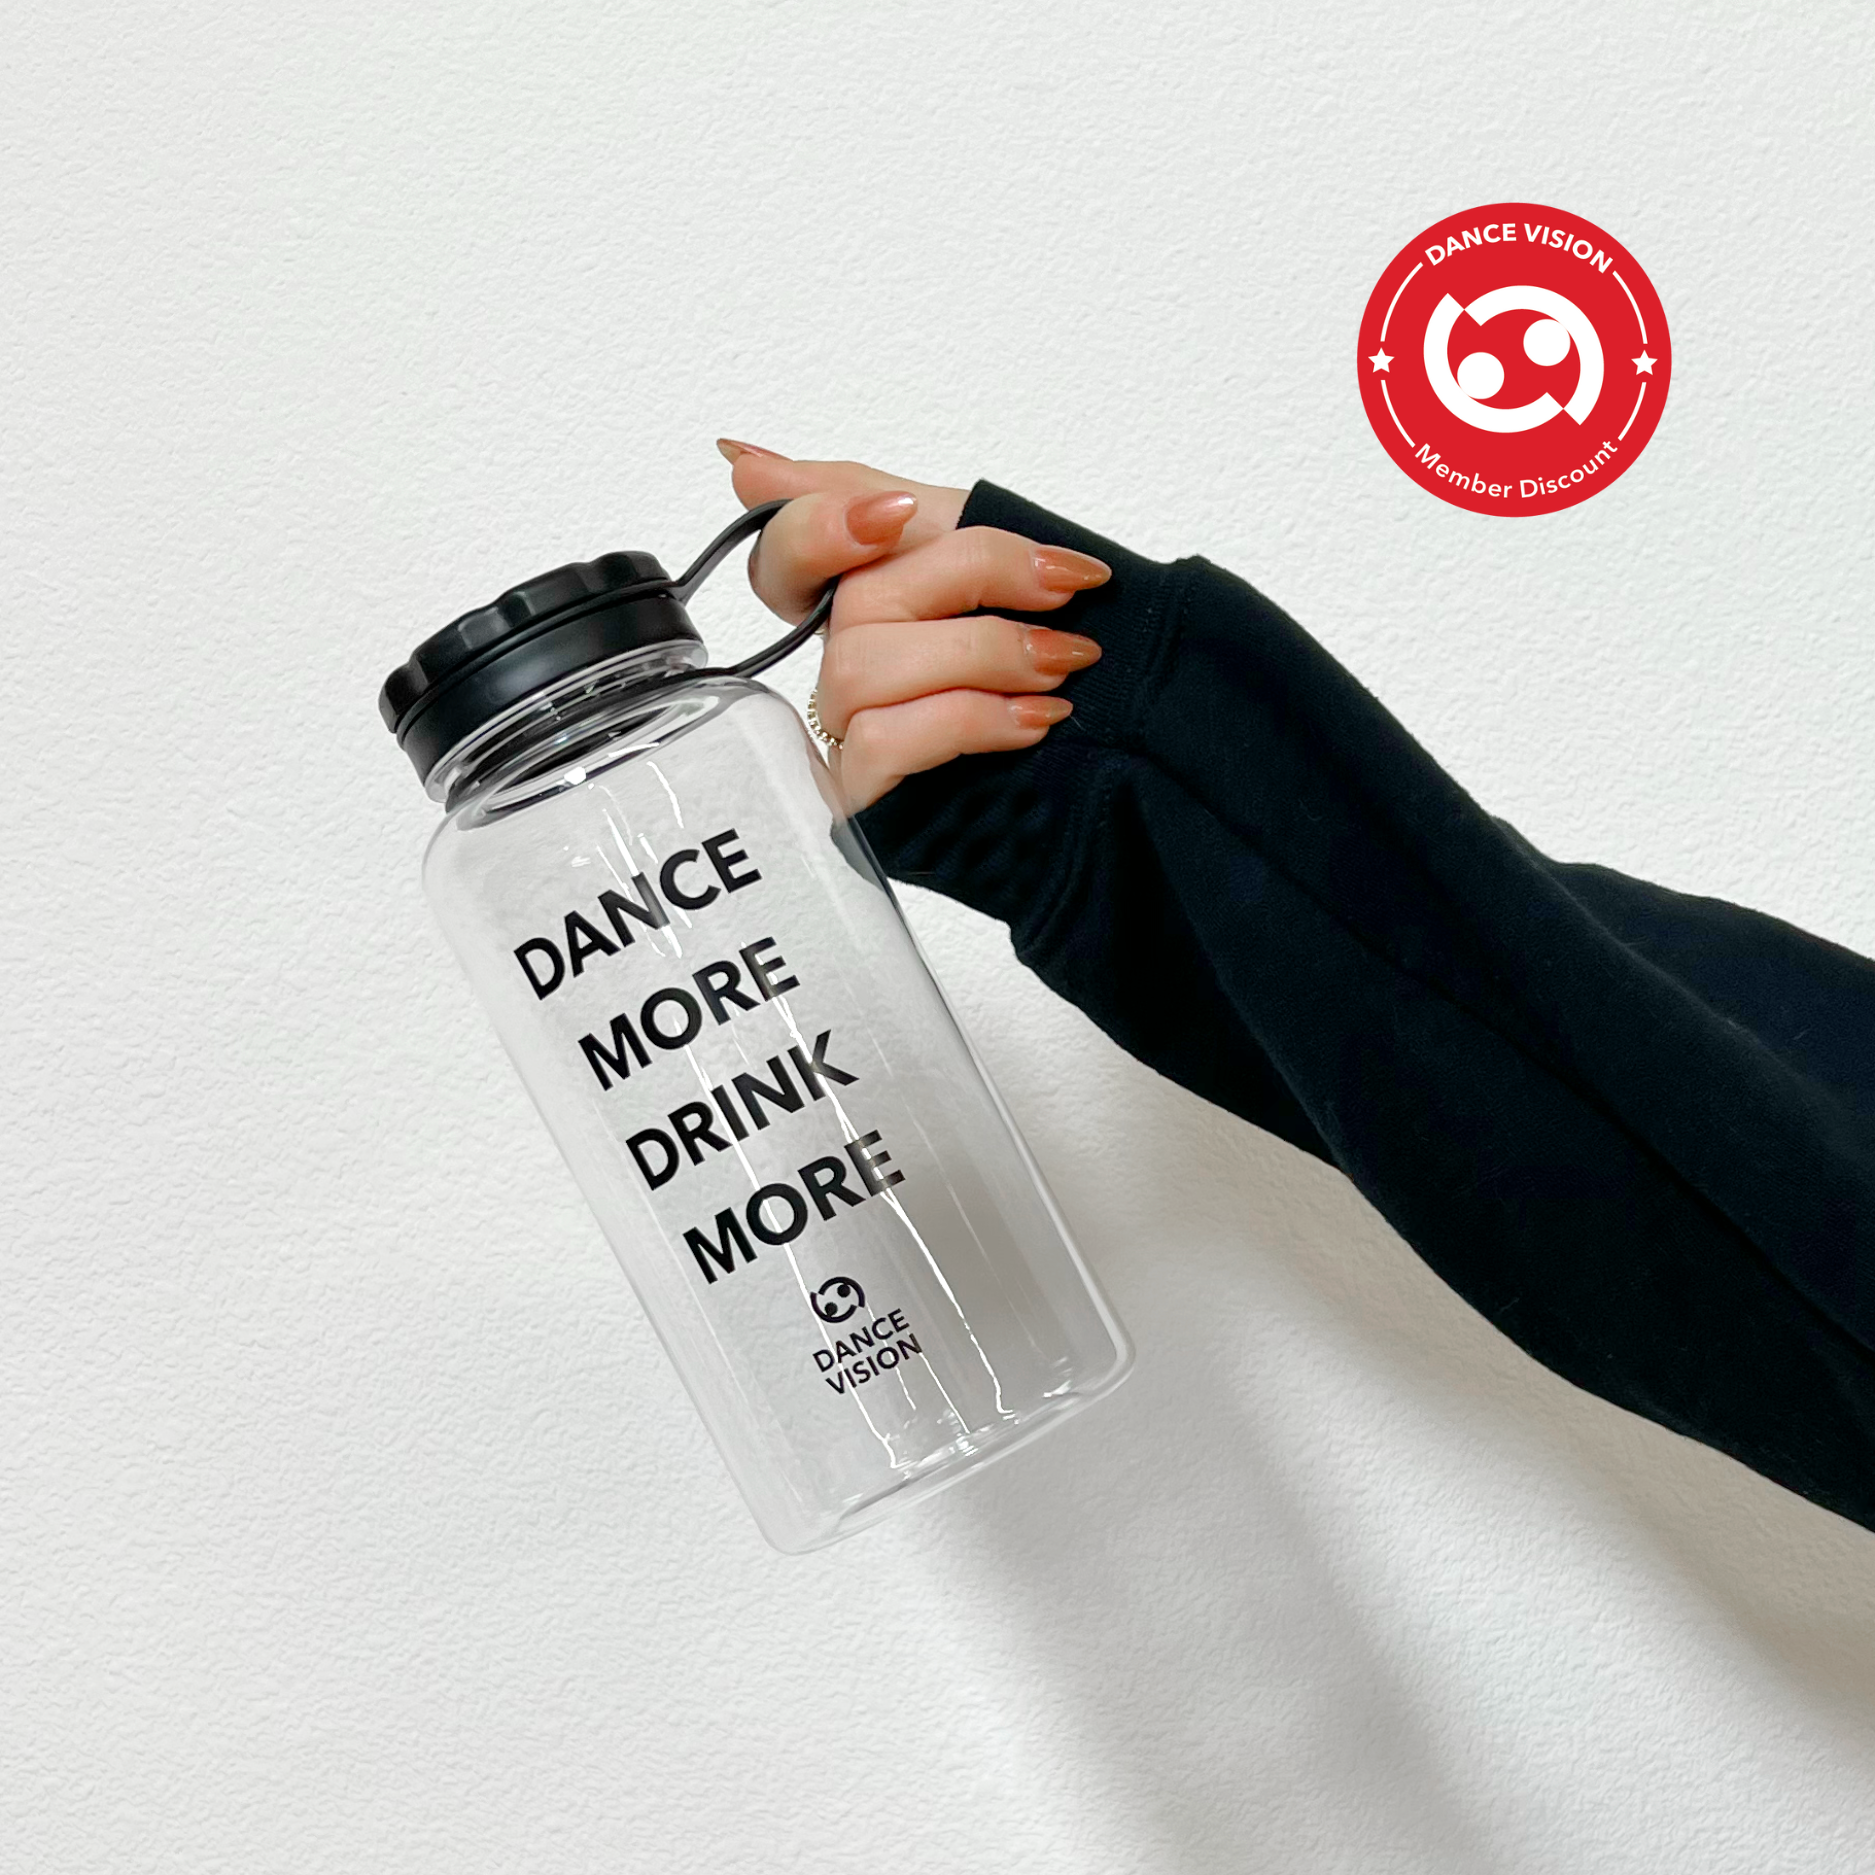 34 oz. [1600 ml] single wall, wide mouth, threaded lid with carrying loop water bottle with "Dance More Live More" design created by Dance Vision.